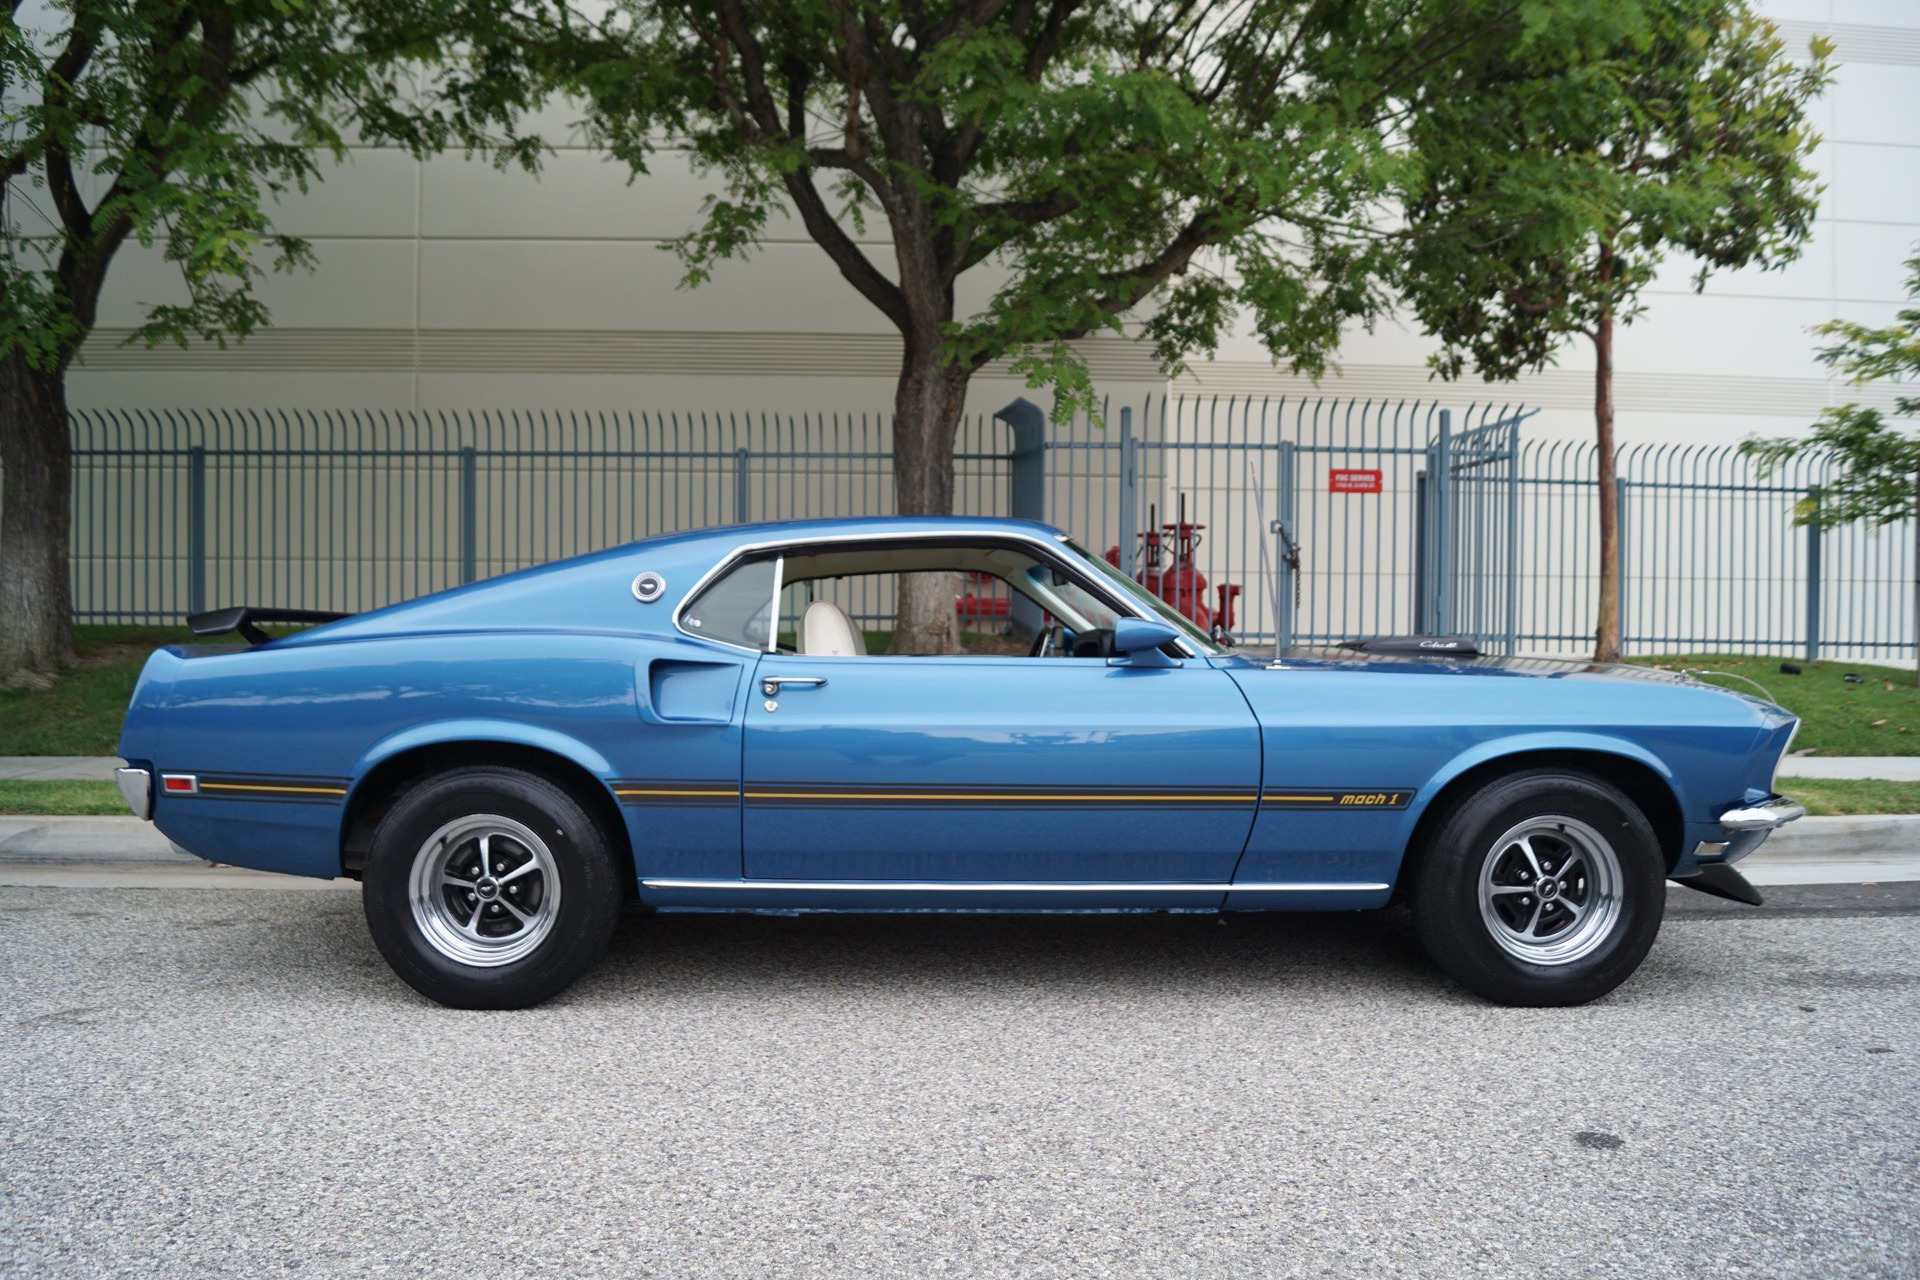 1969 Ford Mustang Mach 1 428335hp V8 Cobra Jet Stock 953 For Sale